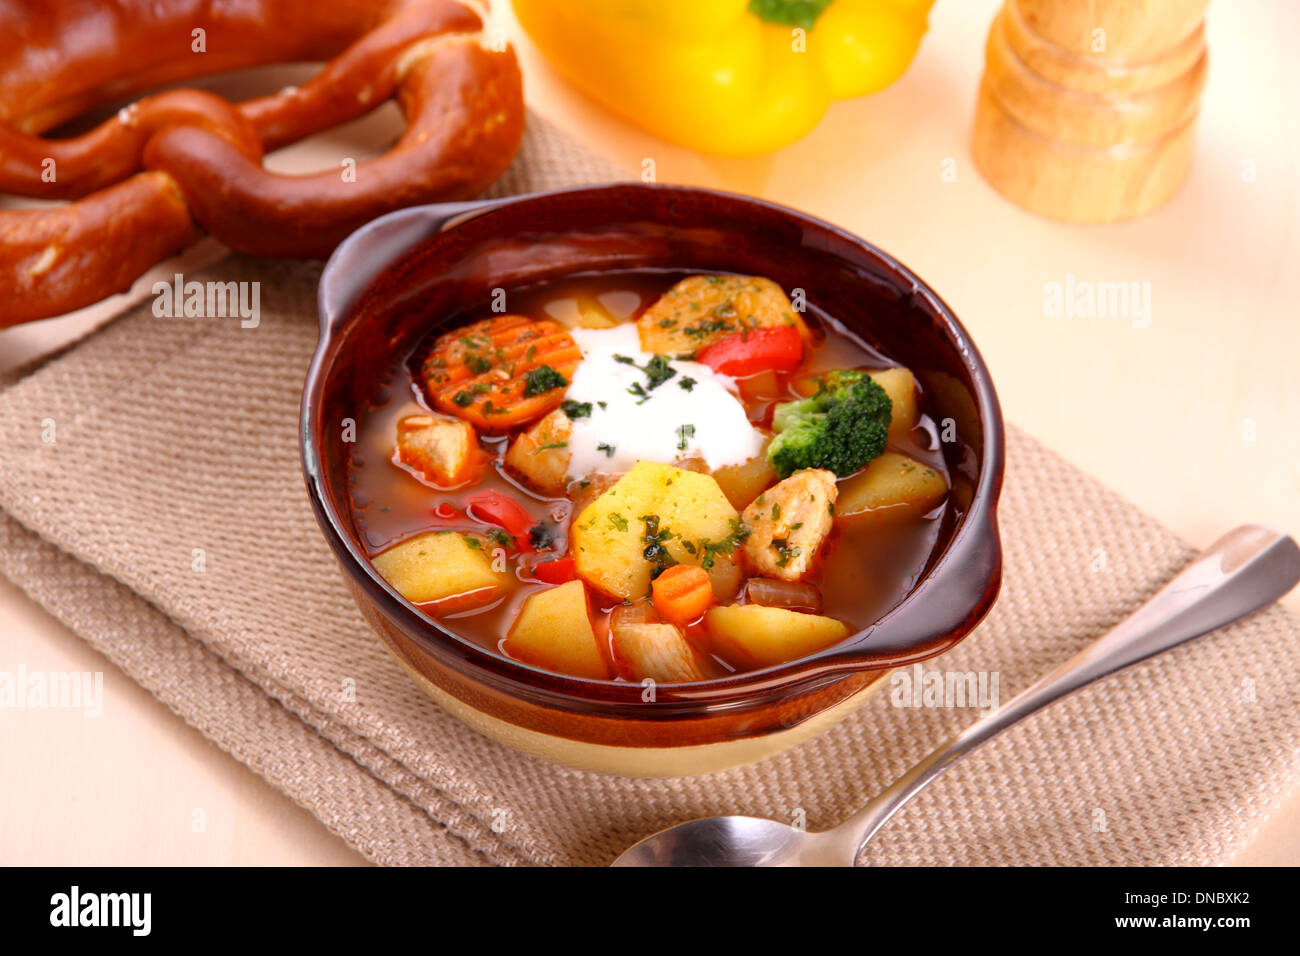 Vegetable stew with chicken and potato, pretzel, close up Stock Photo